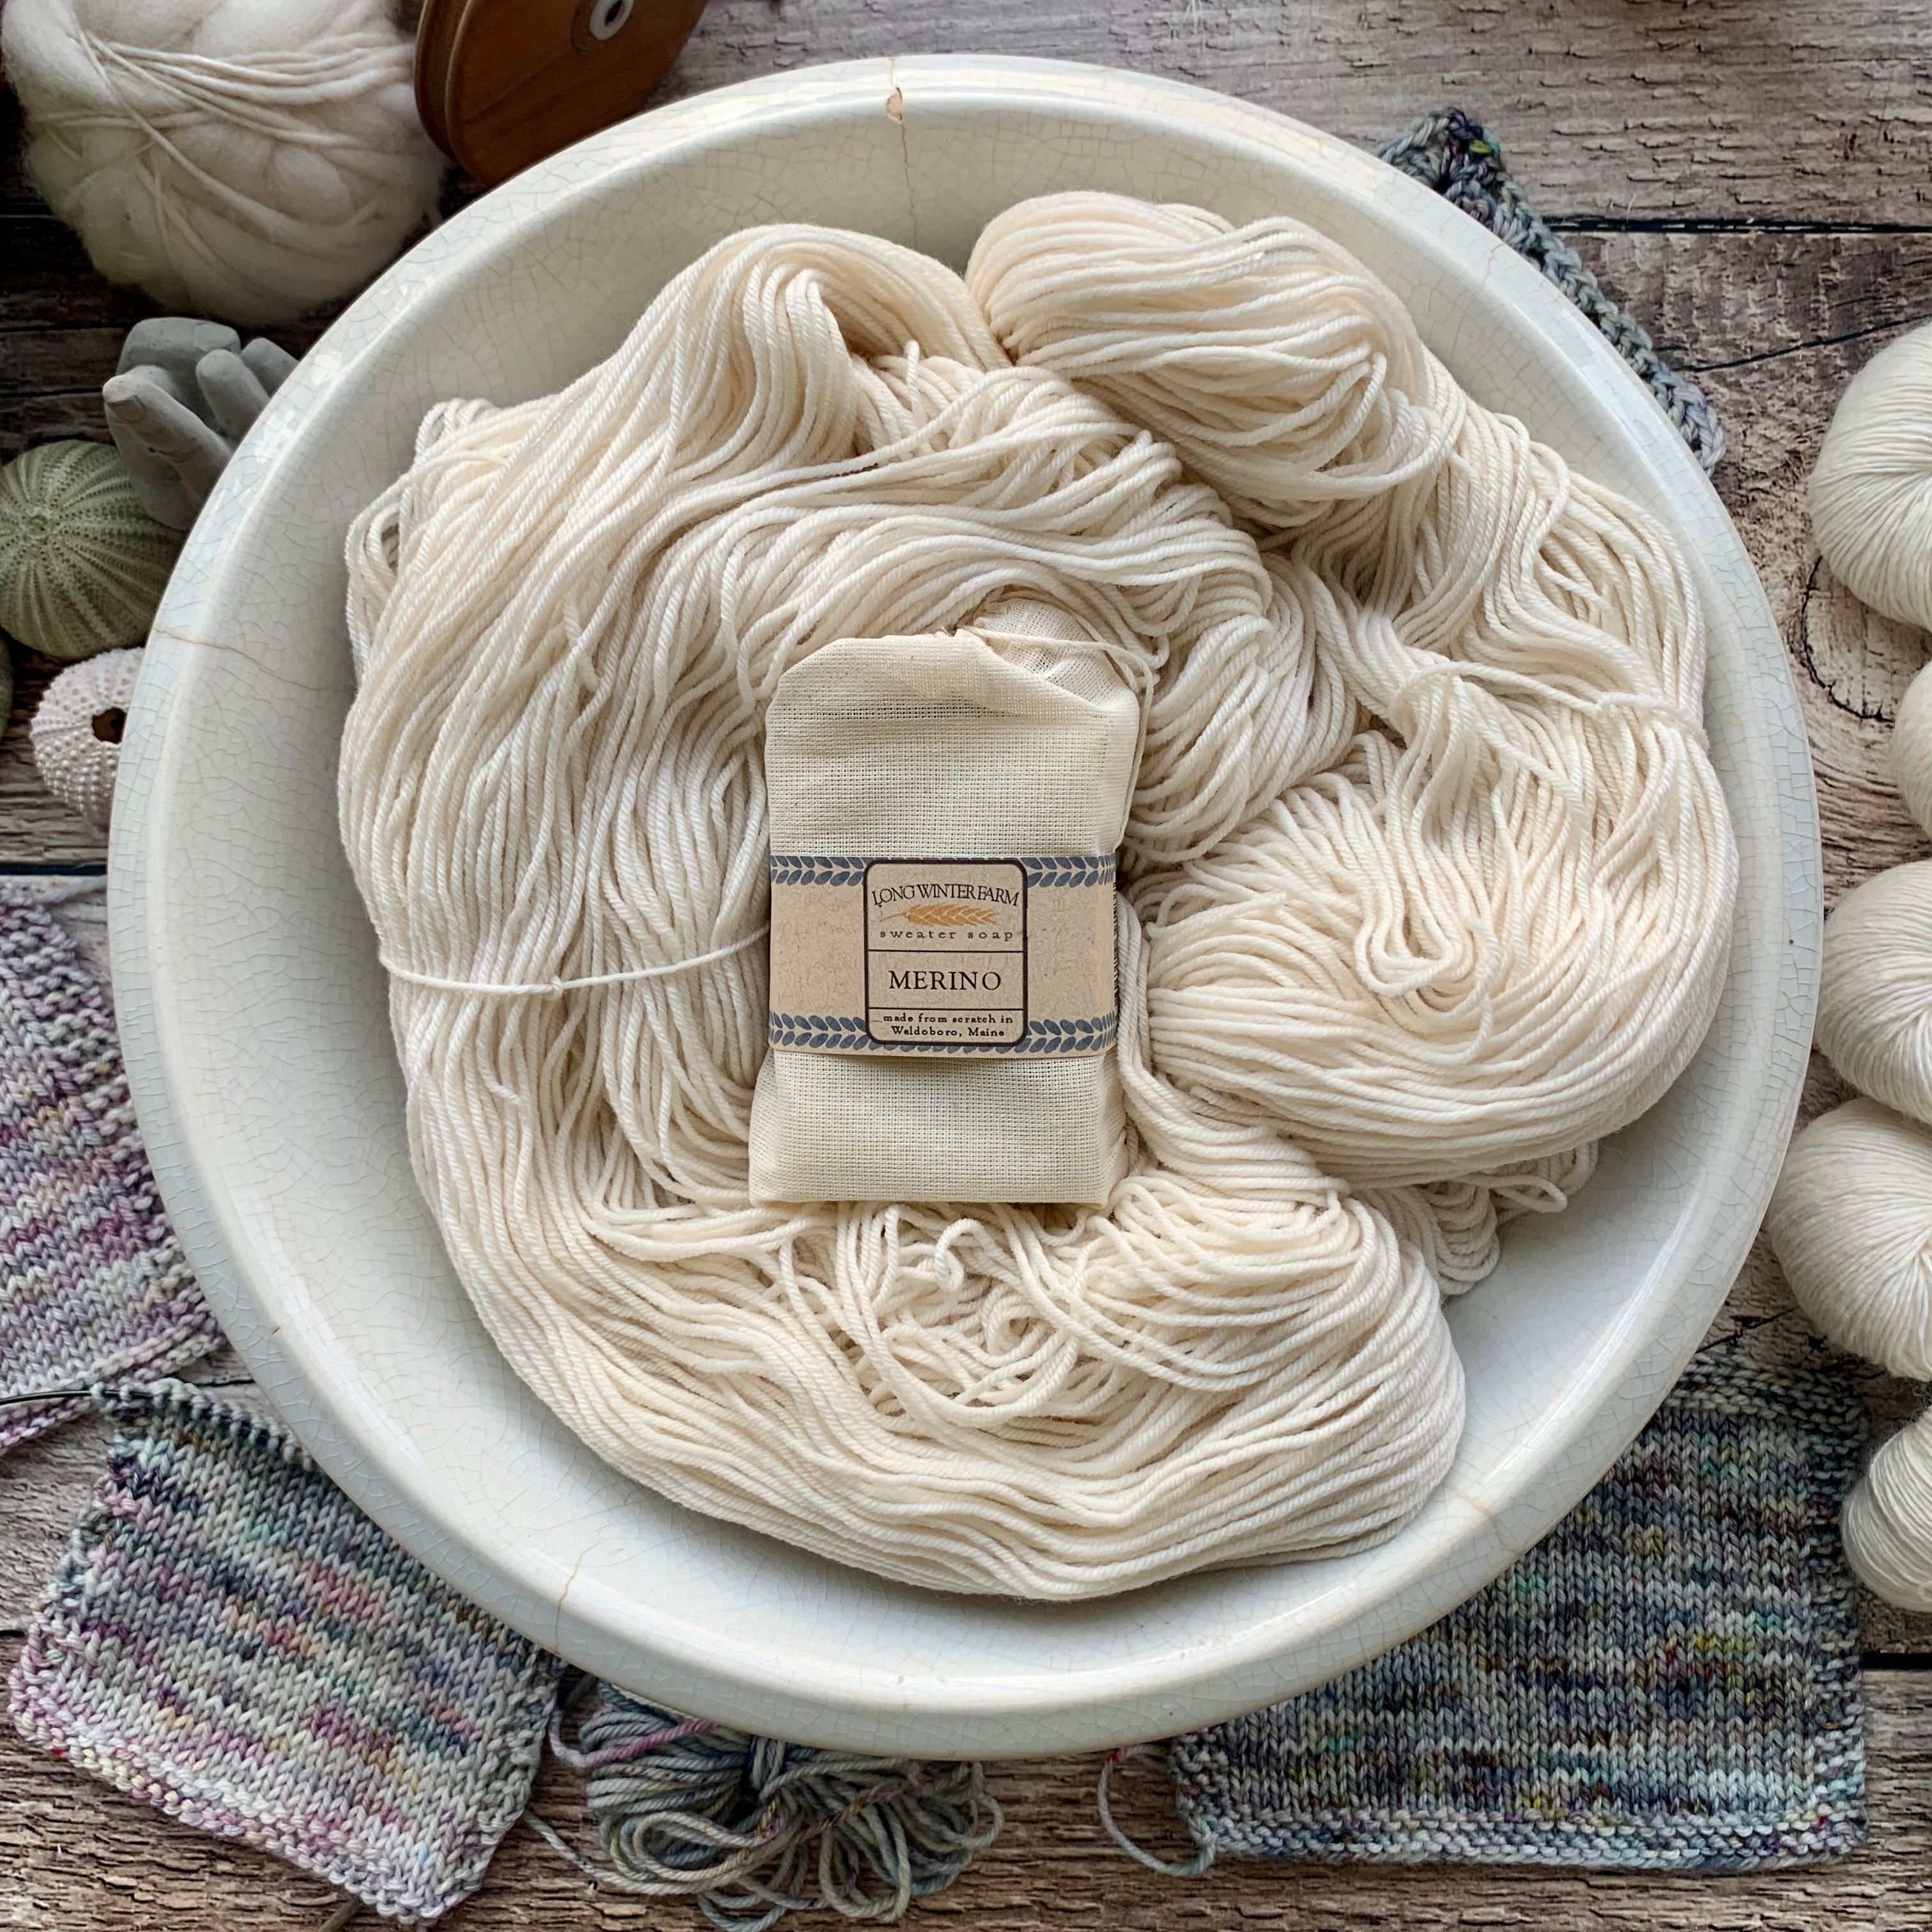 ontheround: uniquely hand dyed yarn & fiber